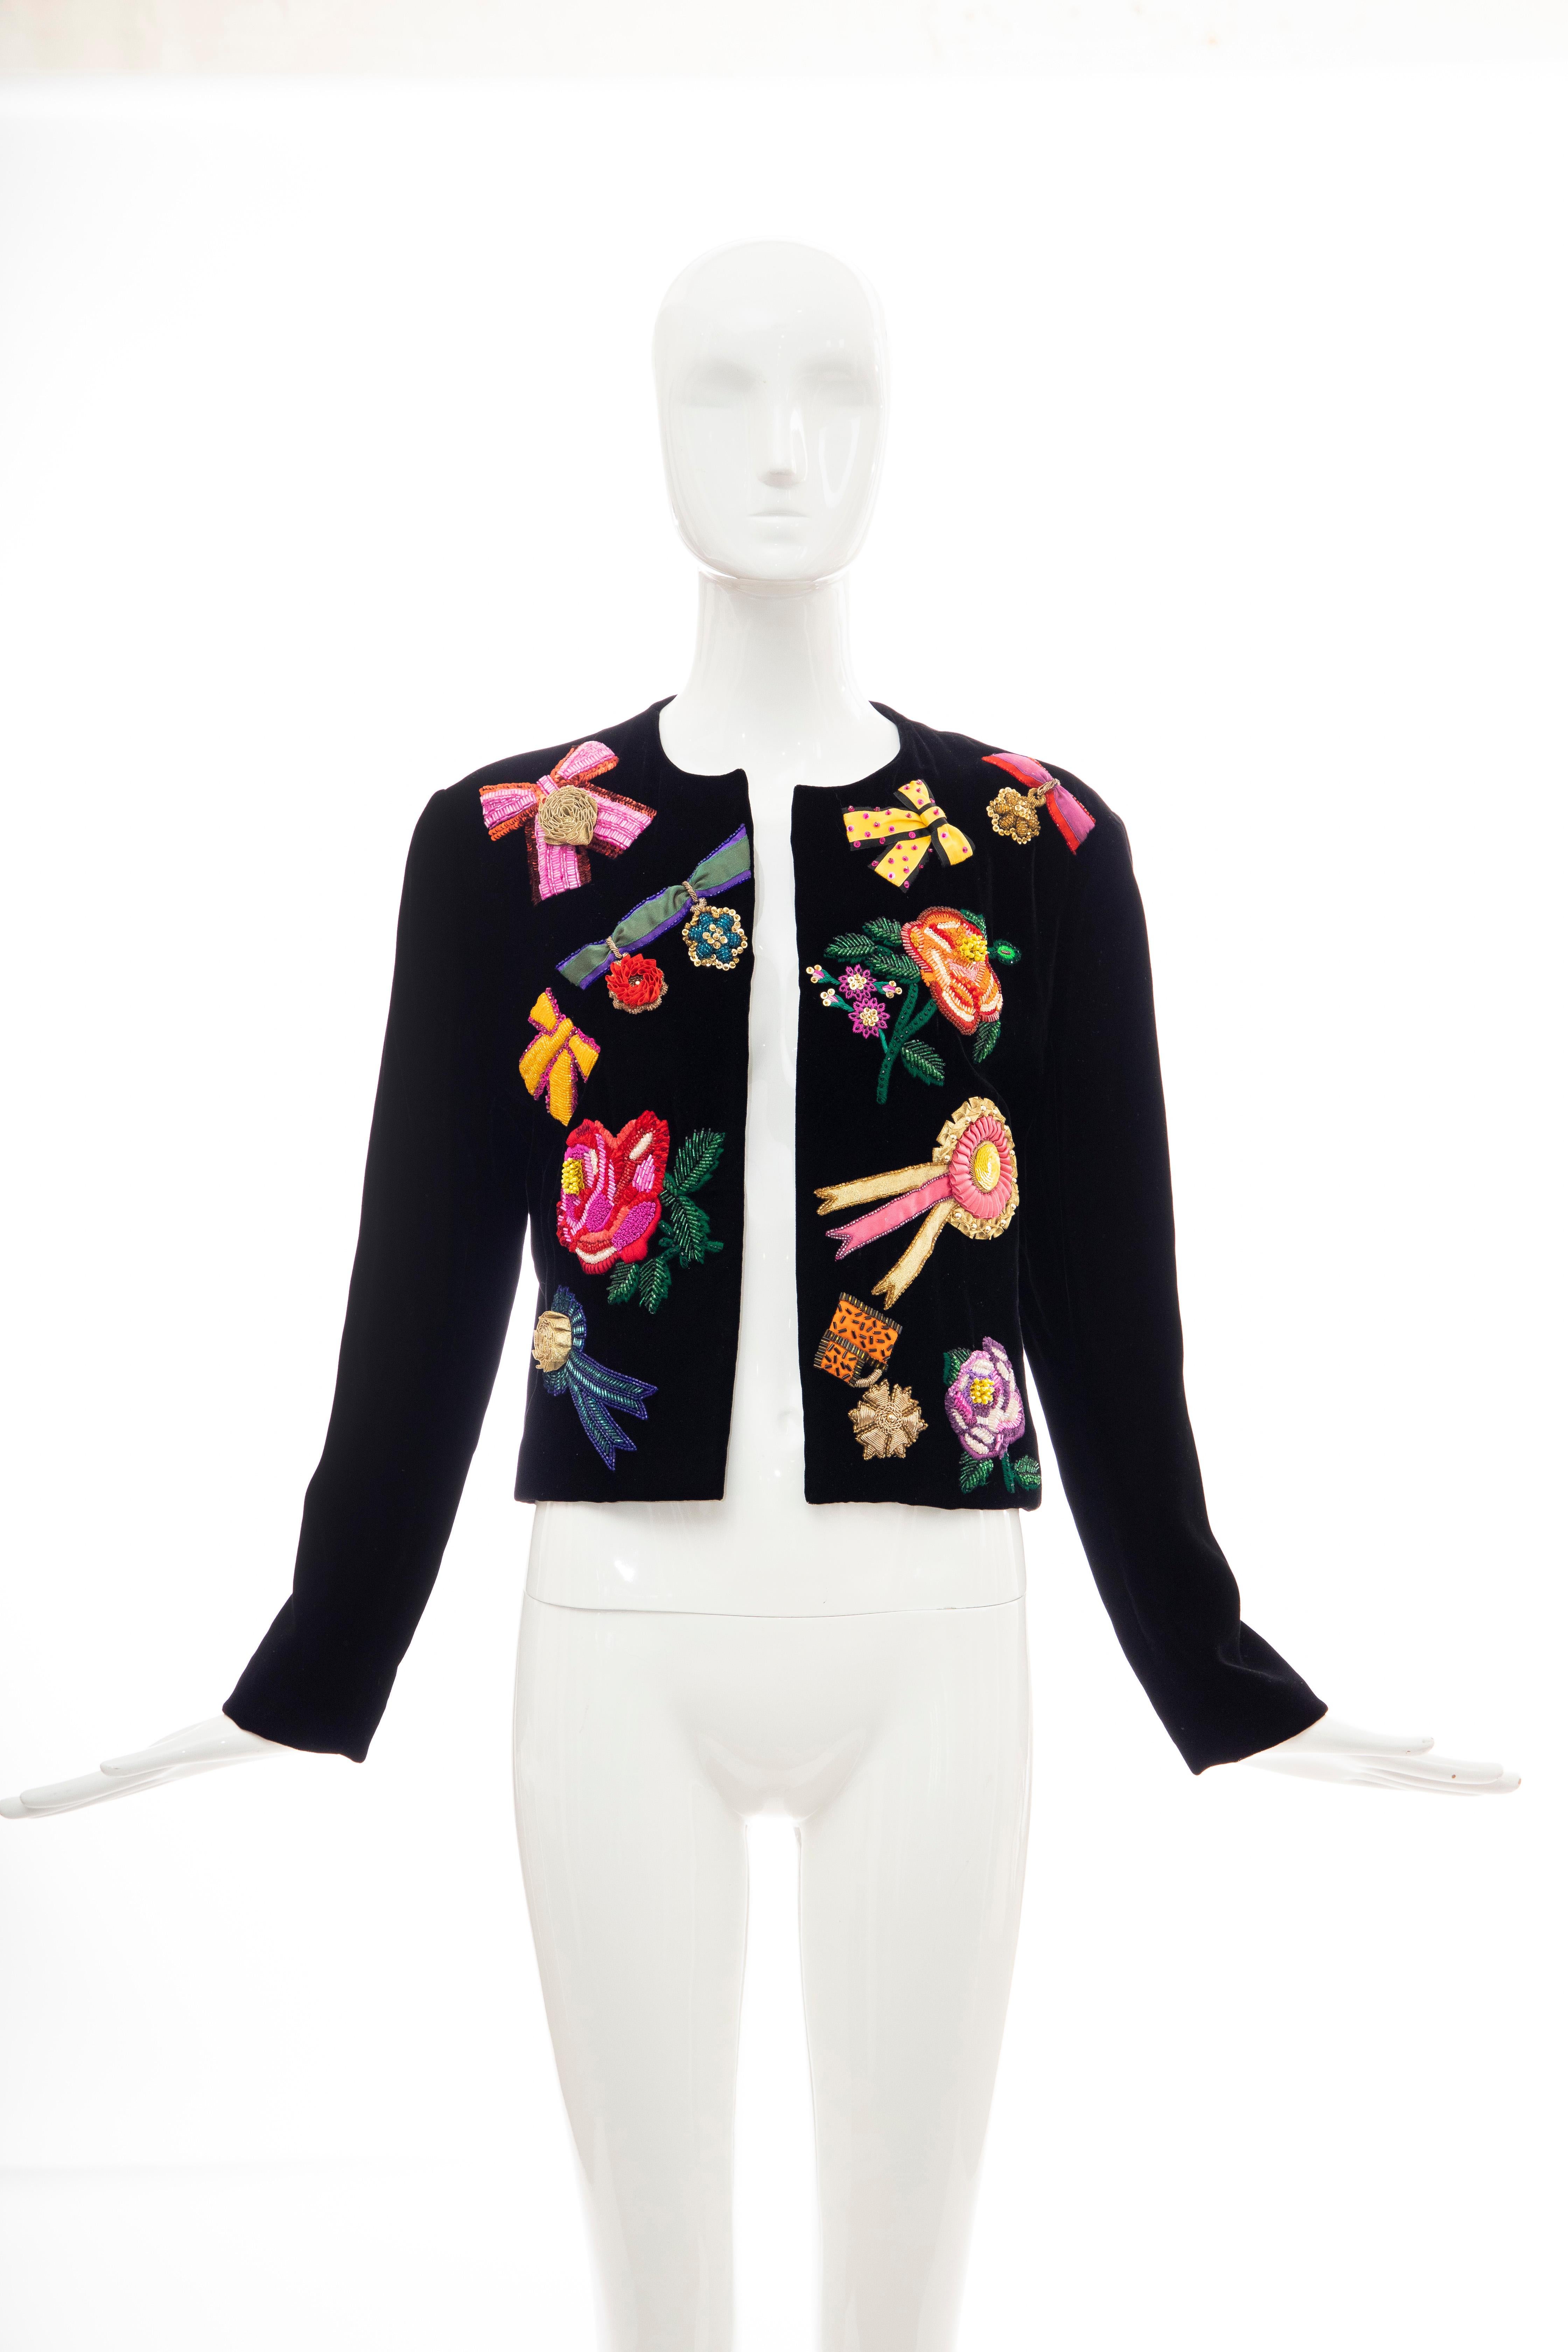 Christian Dior by Marc Bohan, Fall 1988 Runway black velvet open front evening jacket with fancy bows, flowers and beaded ribbon embroidery. 

No Size Label

Bust: 36, Waist: 32, Shoulder: 17, Length: 21, Sleeve: 28.5
